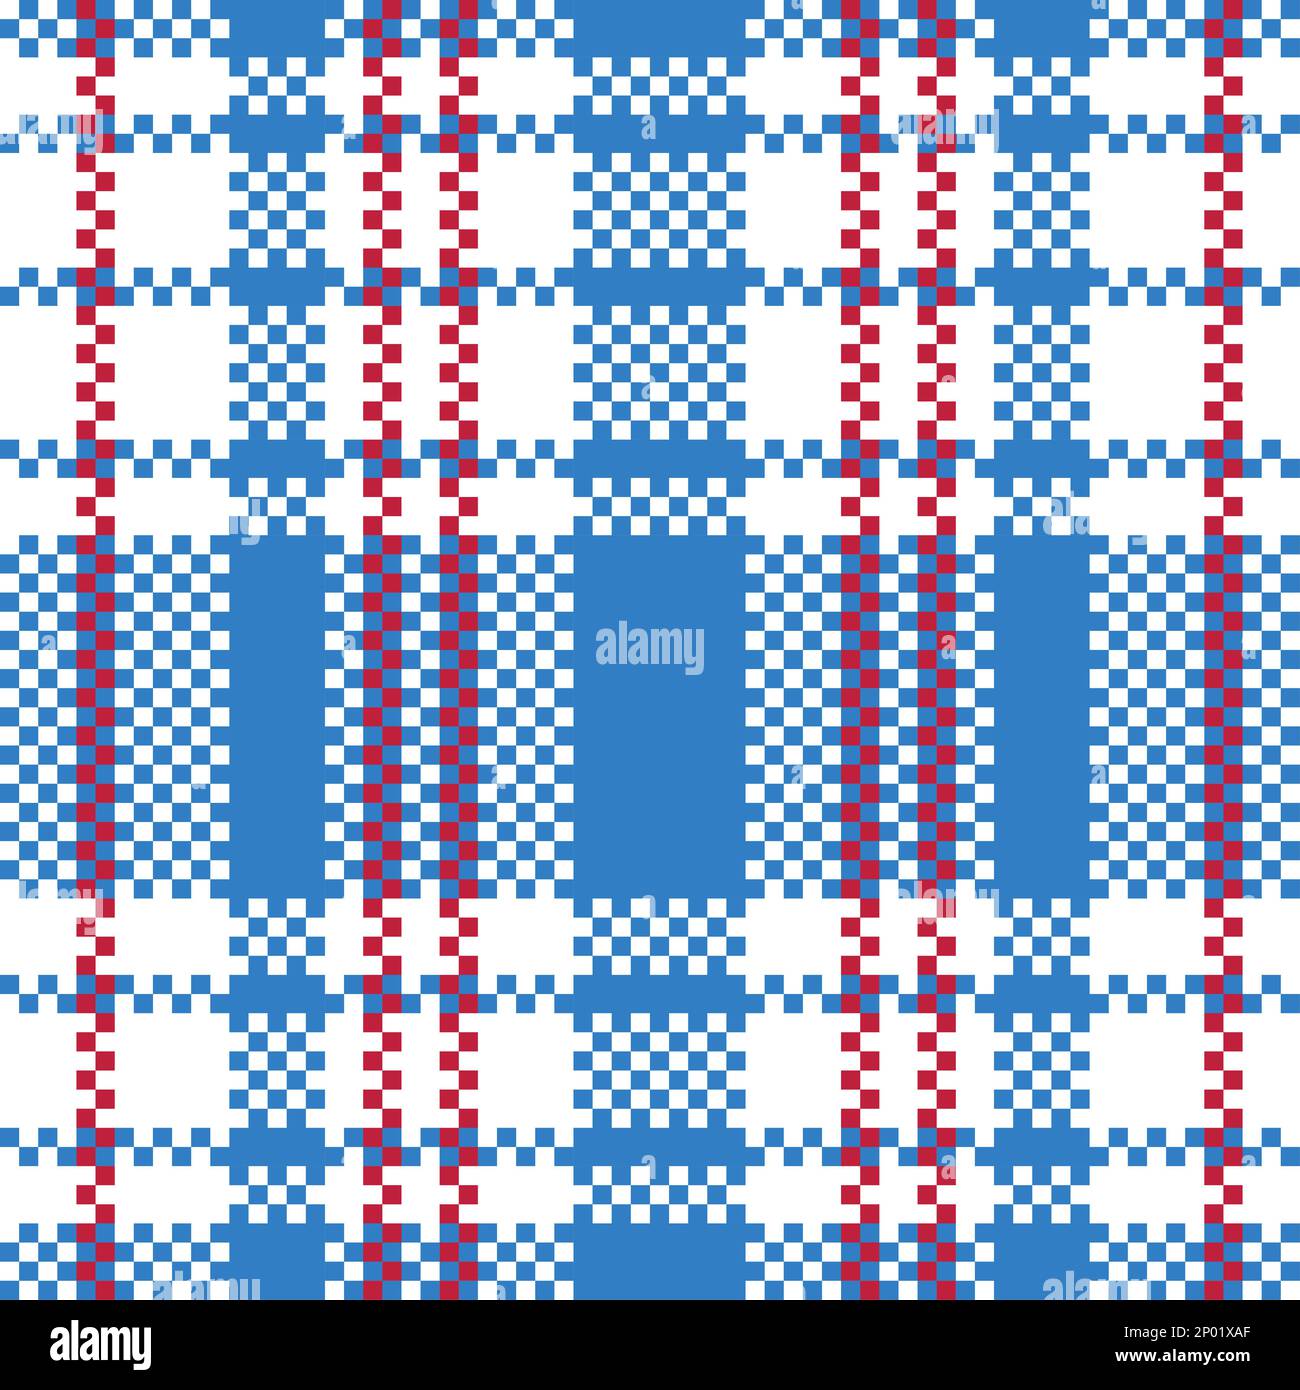 Vector Retro Red White Blue Iconic Old Hong Kong Checker Seamless Pattern for Products or Textile Prints. Stock Photo